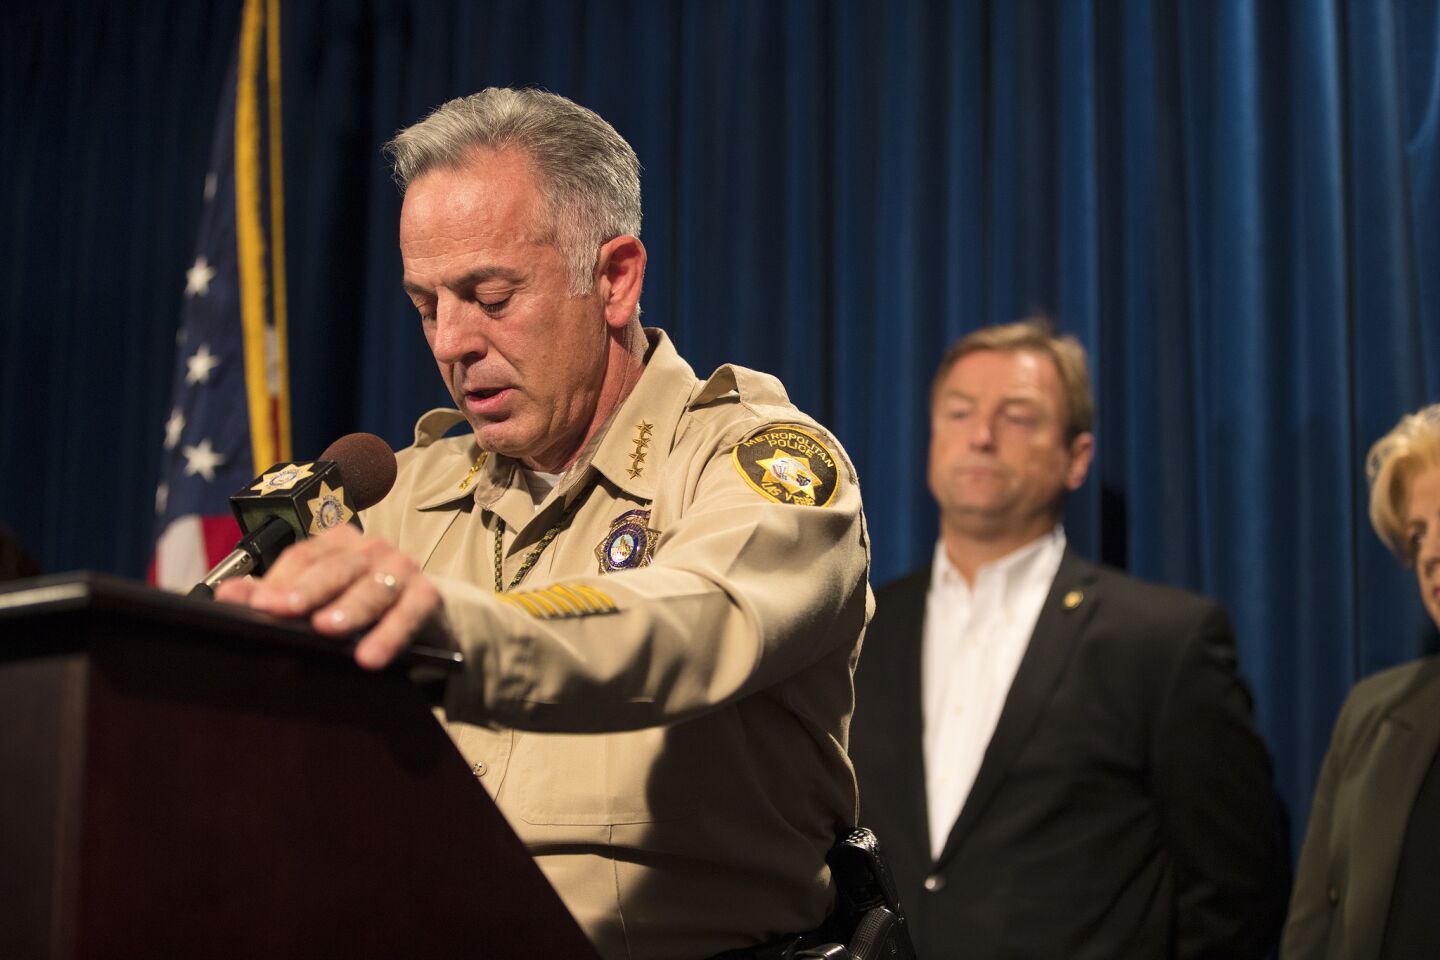 Clark County Sheriff Joe Lombardo updates the toll from the mass shooting to 59 killed and 527 injured during a news conference Las Vegas.